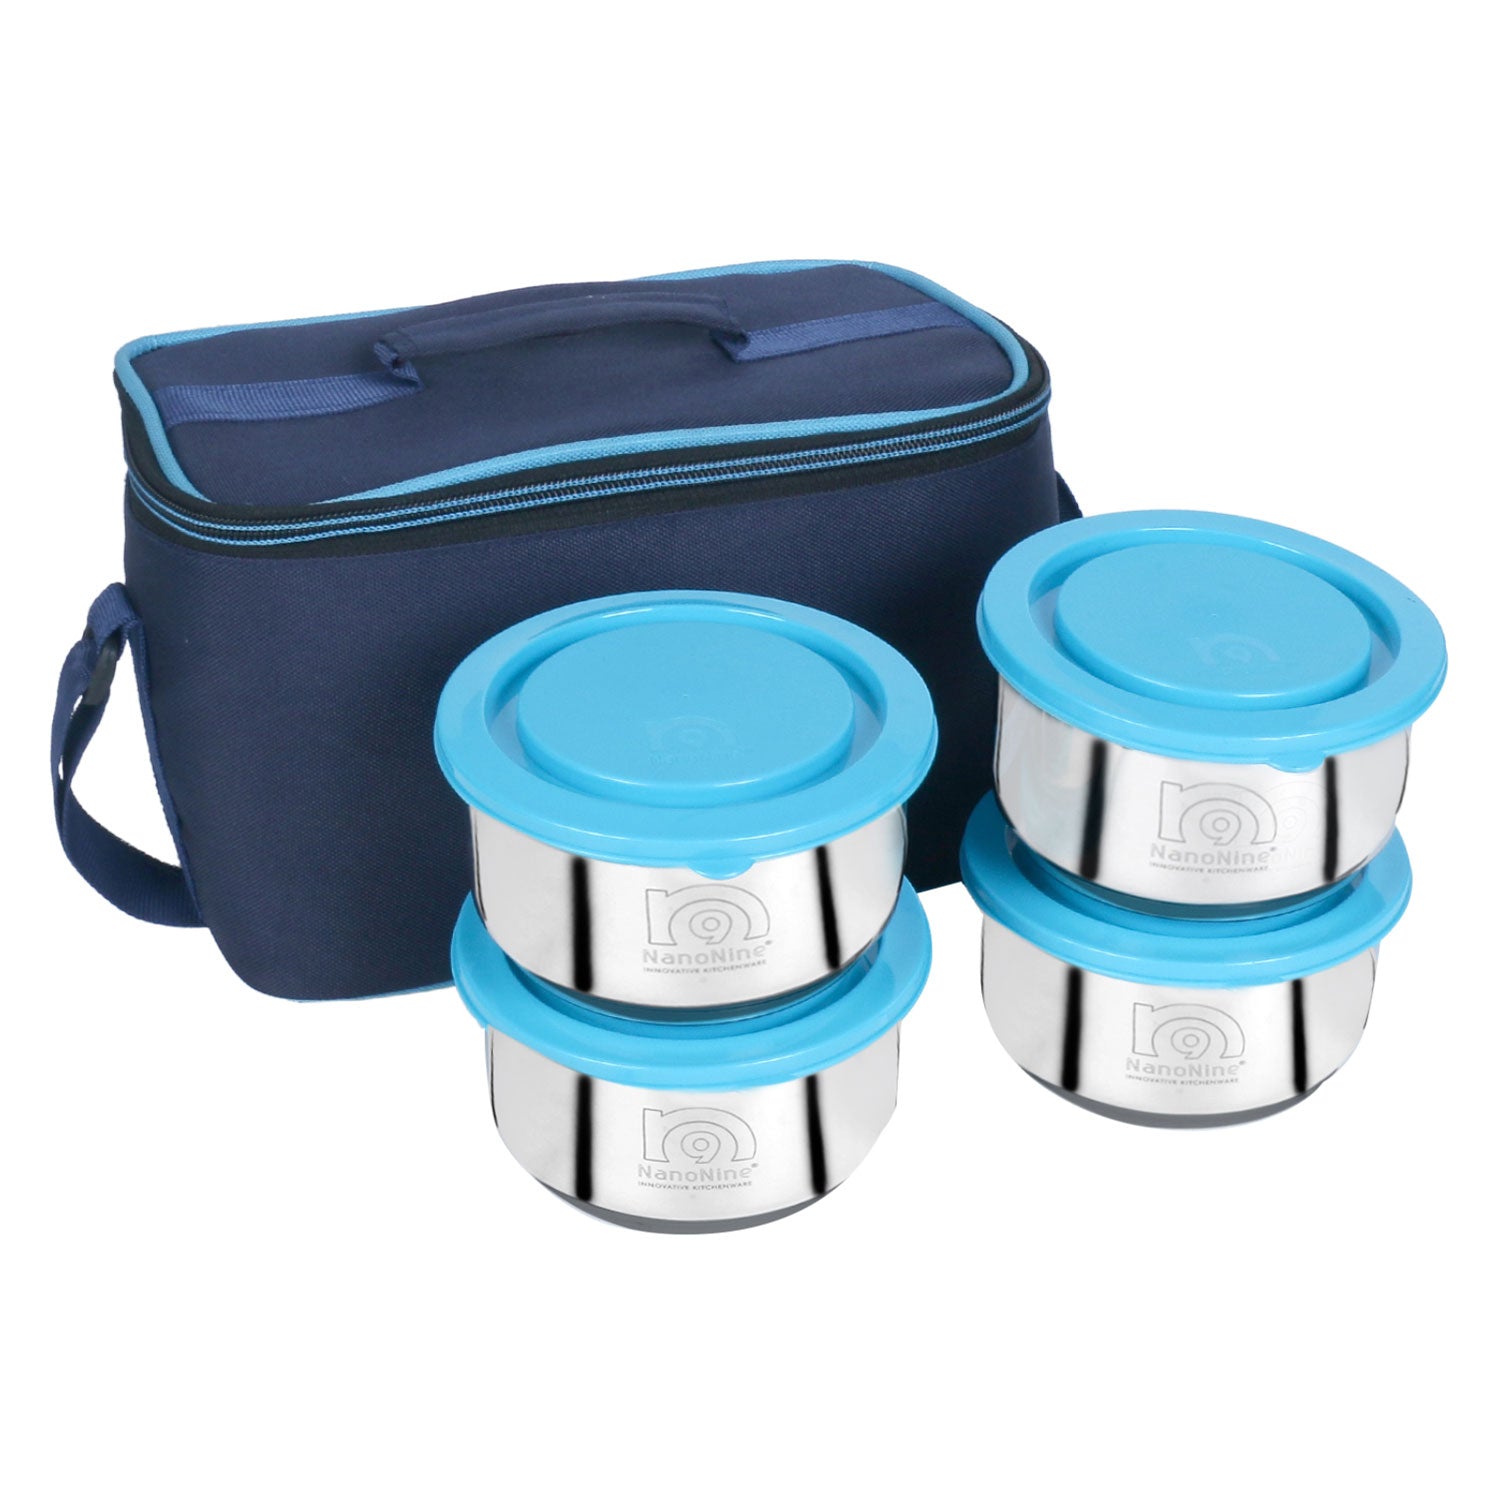 NanoNine Tiffiny Mid Day 260 ml X 4 Double Wall Insulated Stainless Steel Lunch Box, Royal Blue.